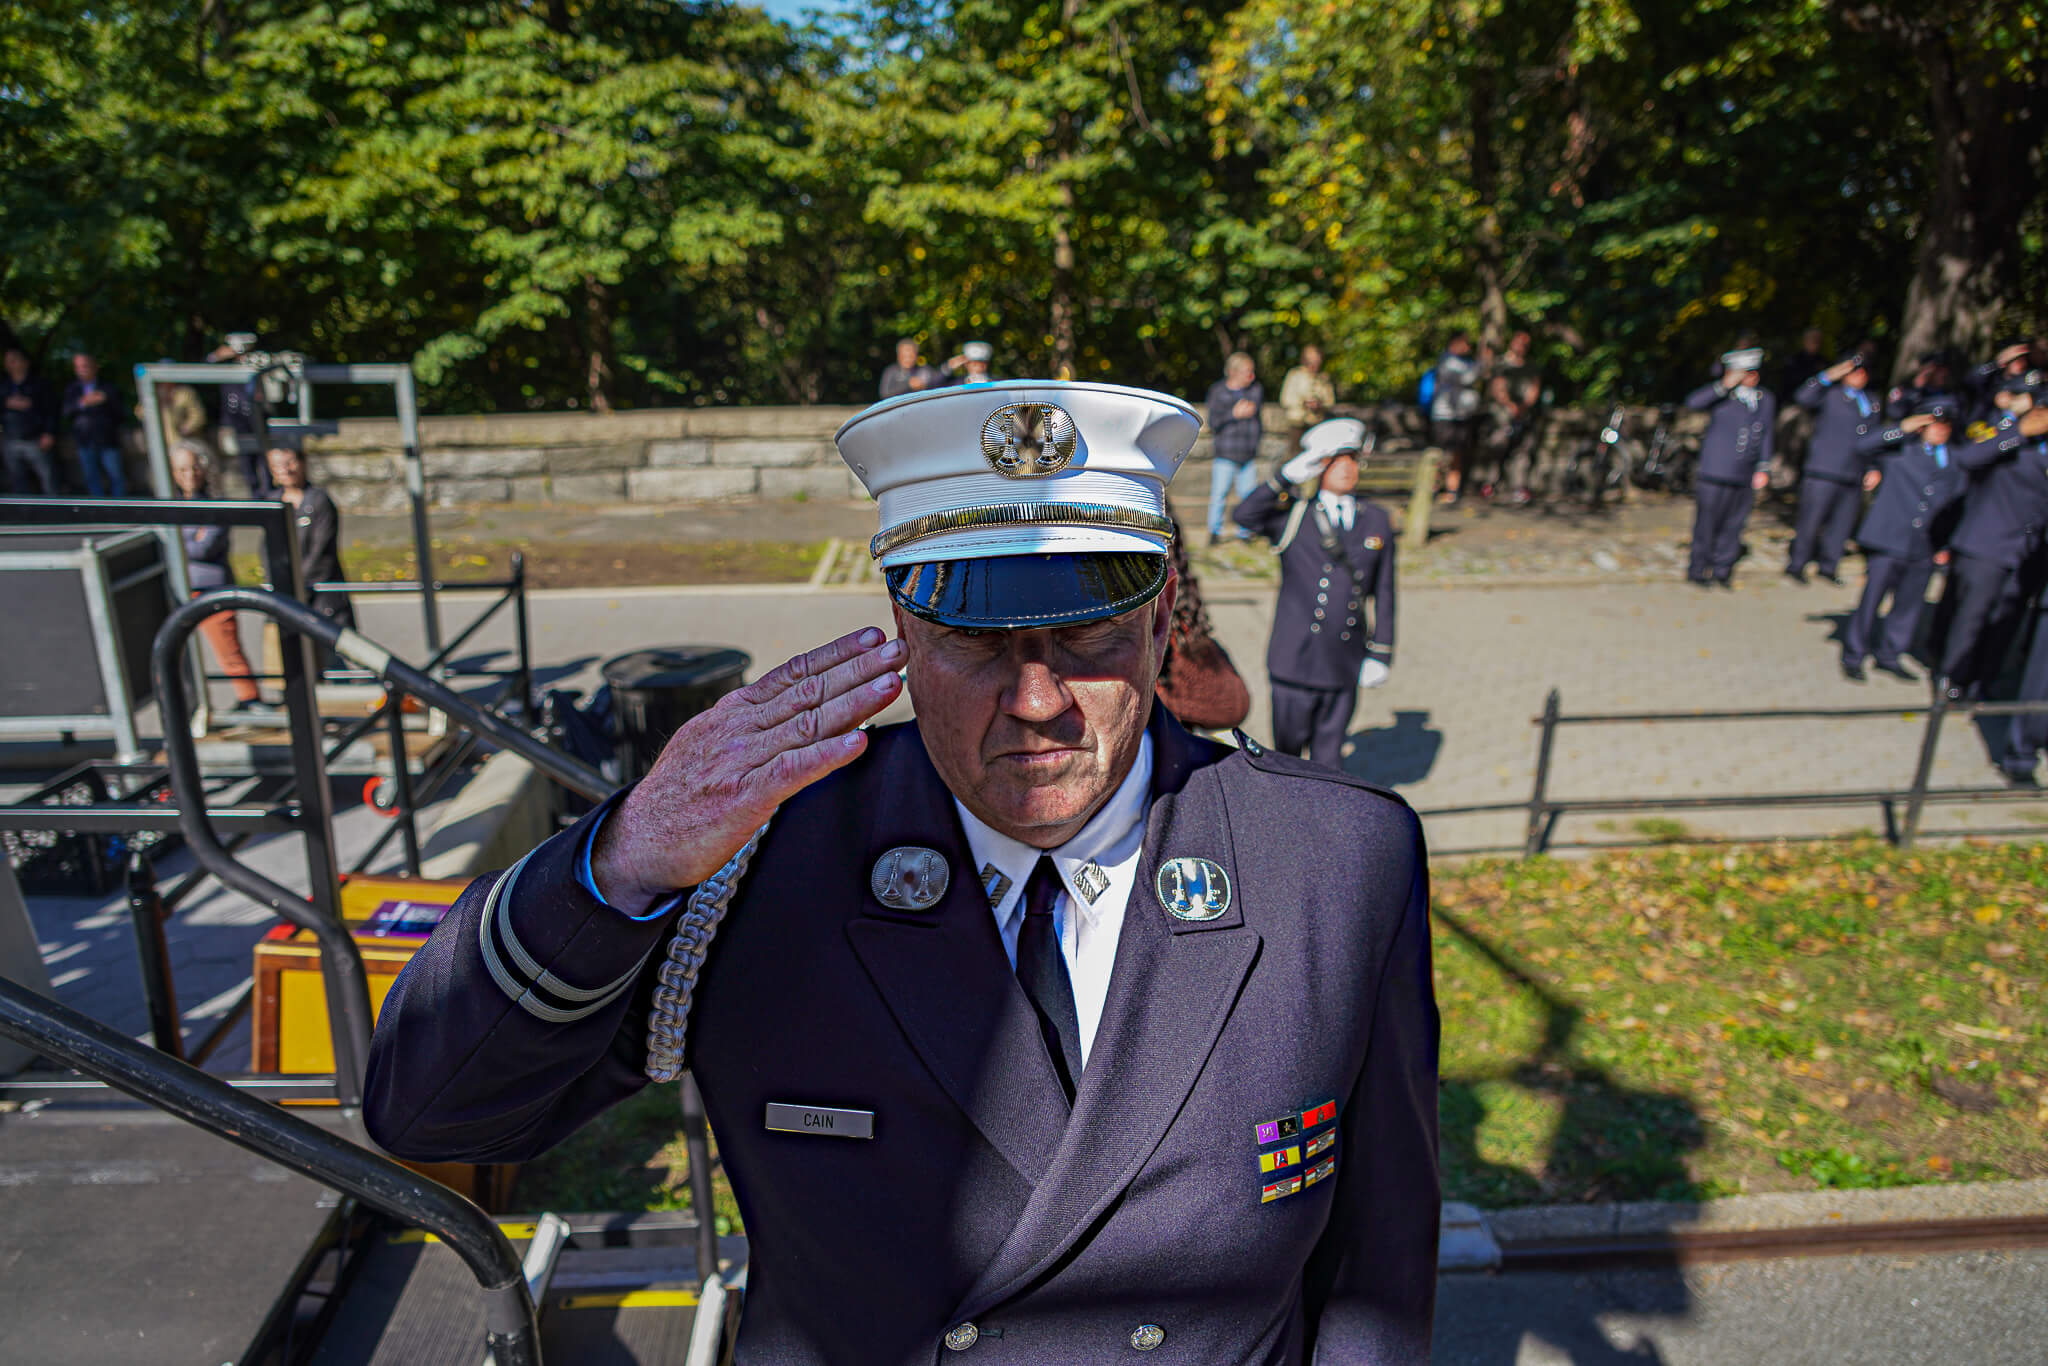 Uptowns to Honor New York City's Bravest